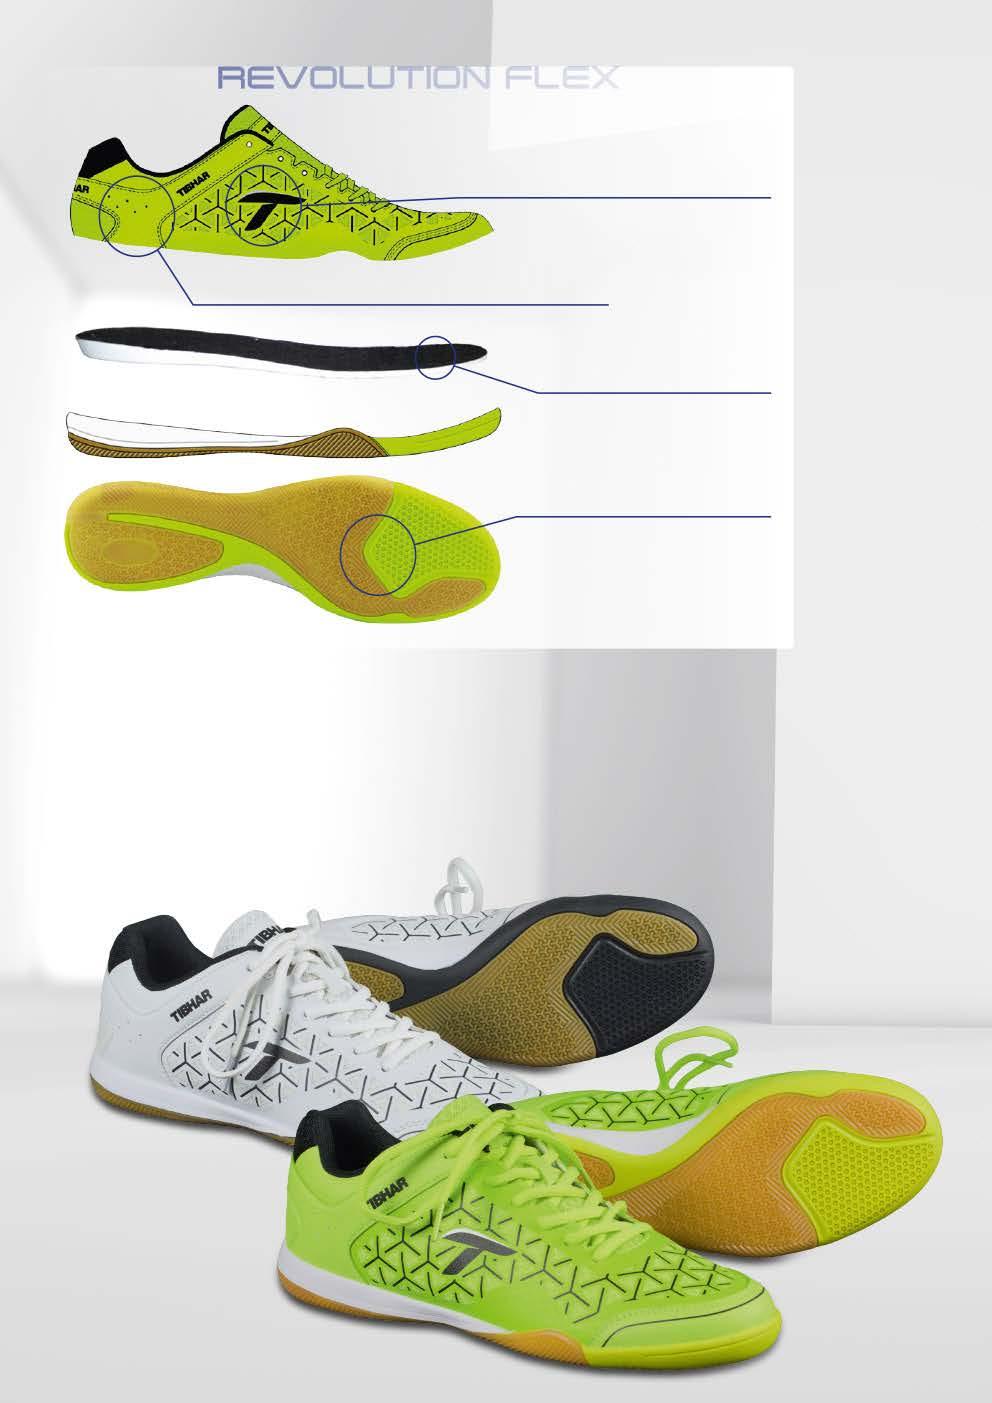 High-tech material made from two components featuring an extravagant 3D imprint PU protection for an optimal ankle stablization Mid-sole made from breathable fabric Special sole for optimal floor